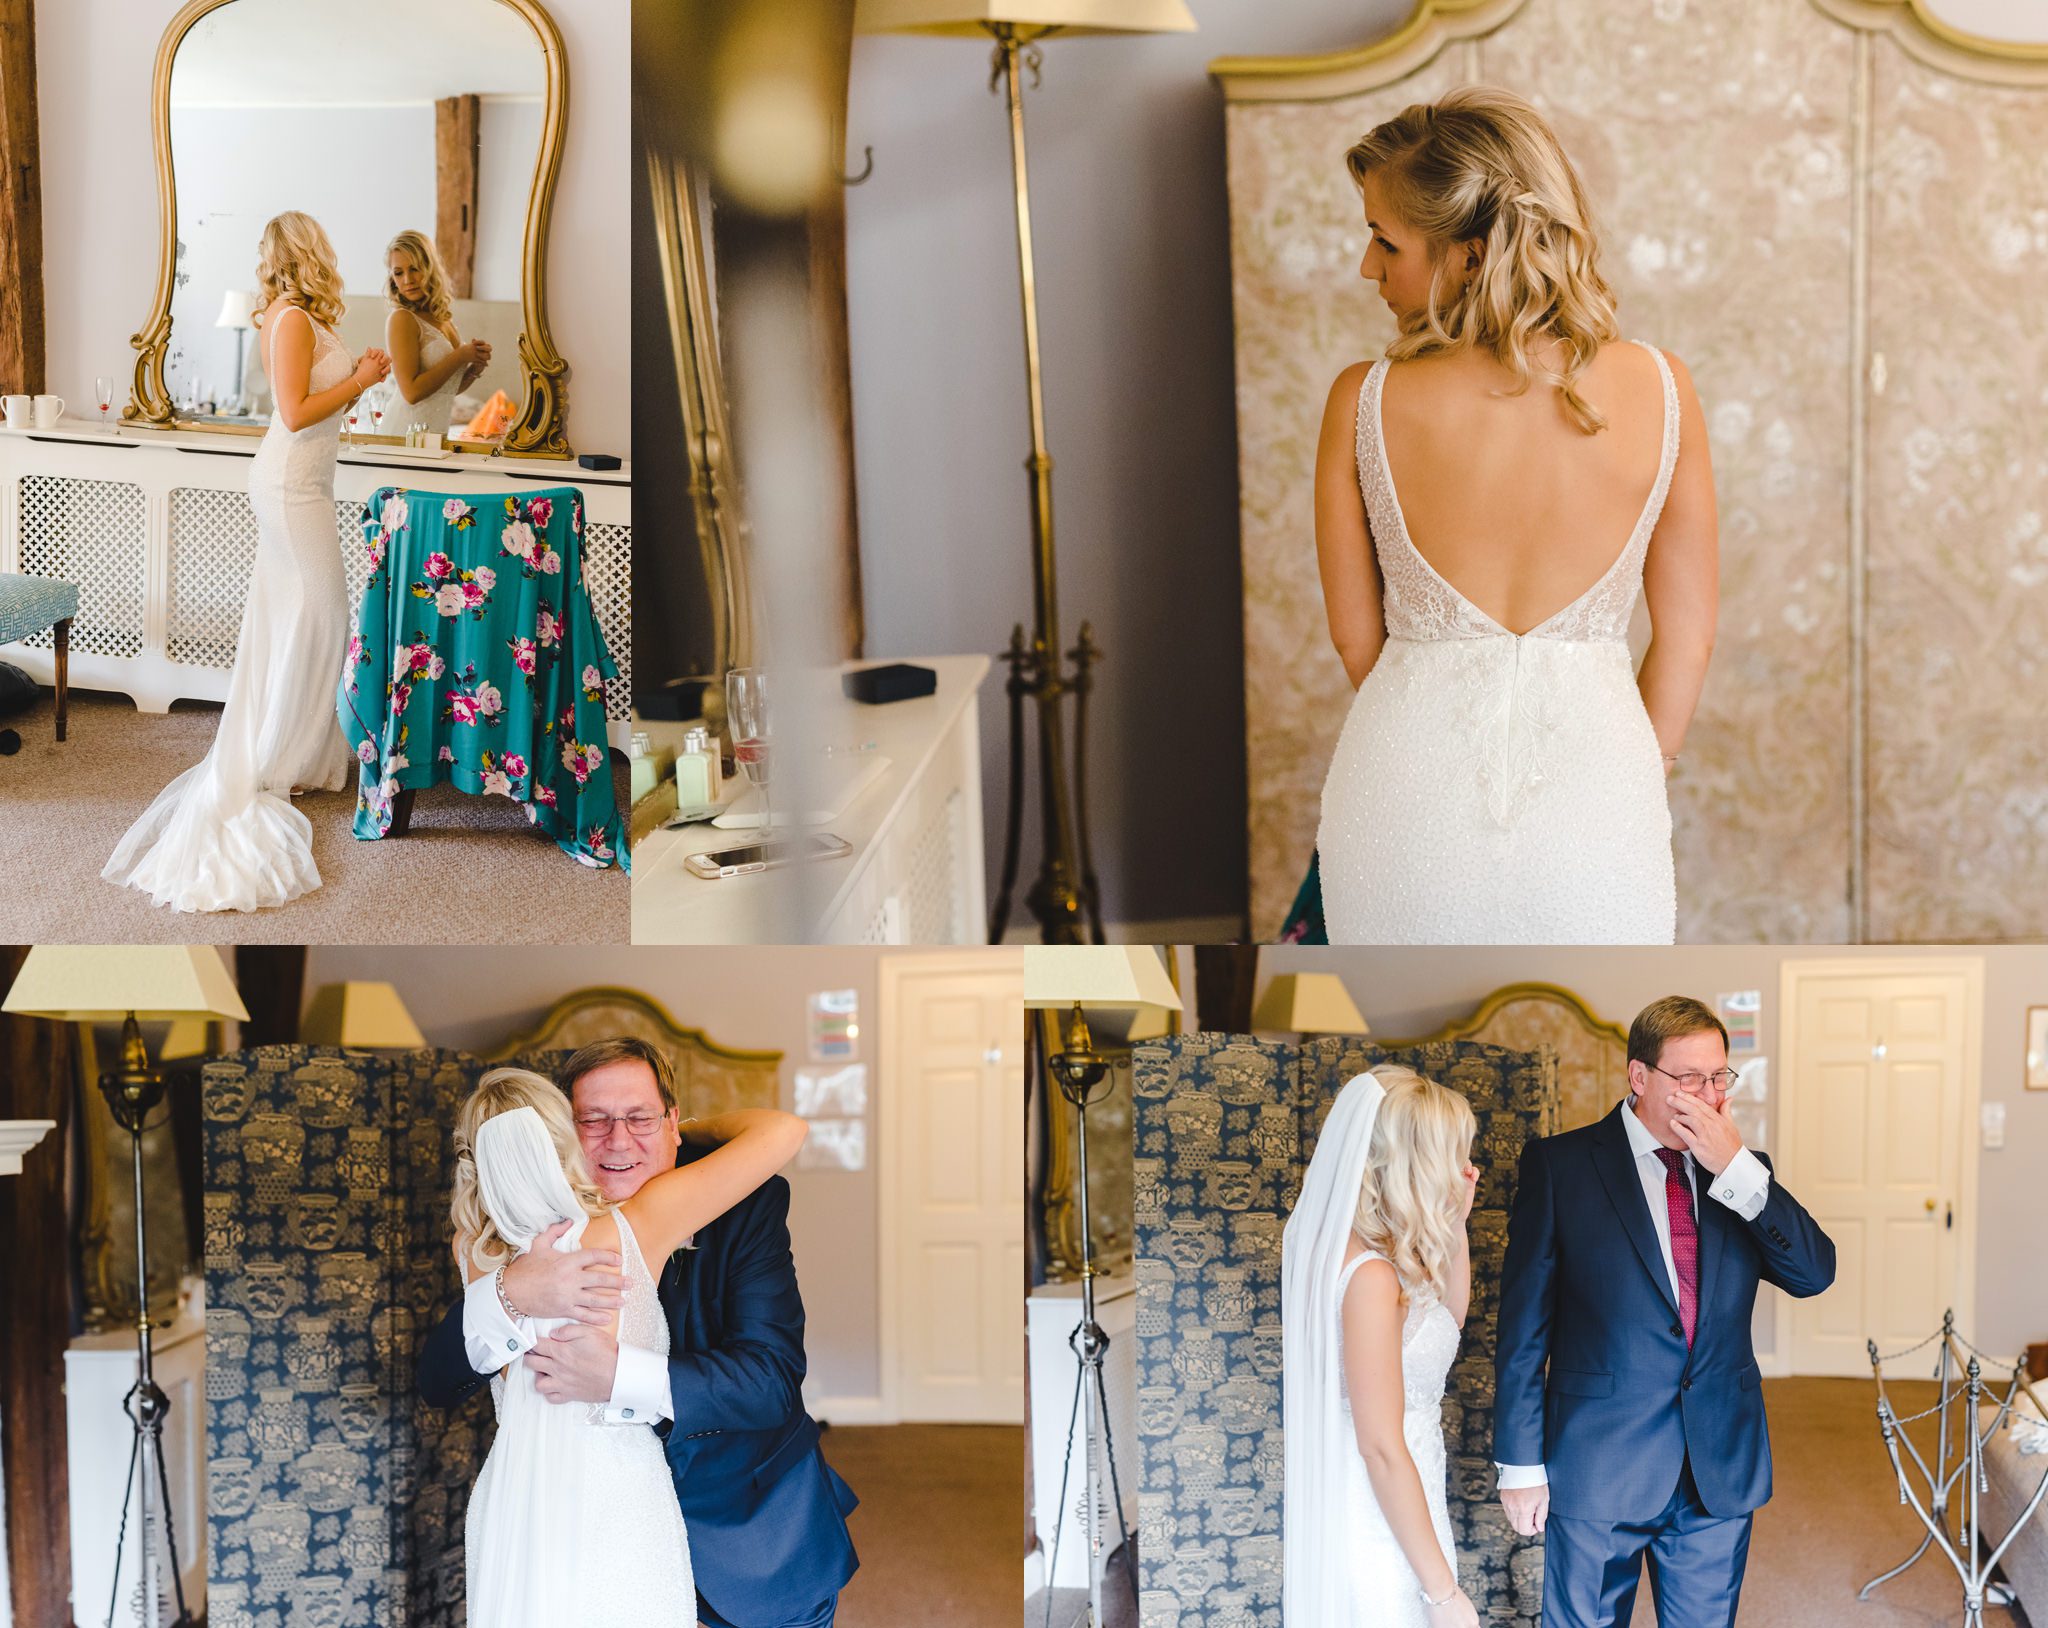 A bride's first look with her father after putting her wedding dress on at Brinsop Court